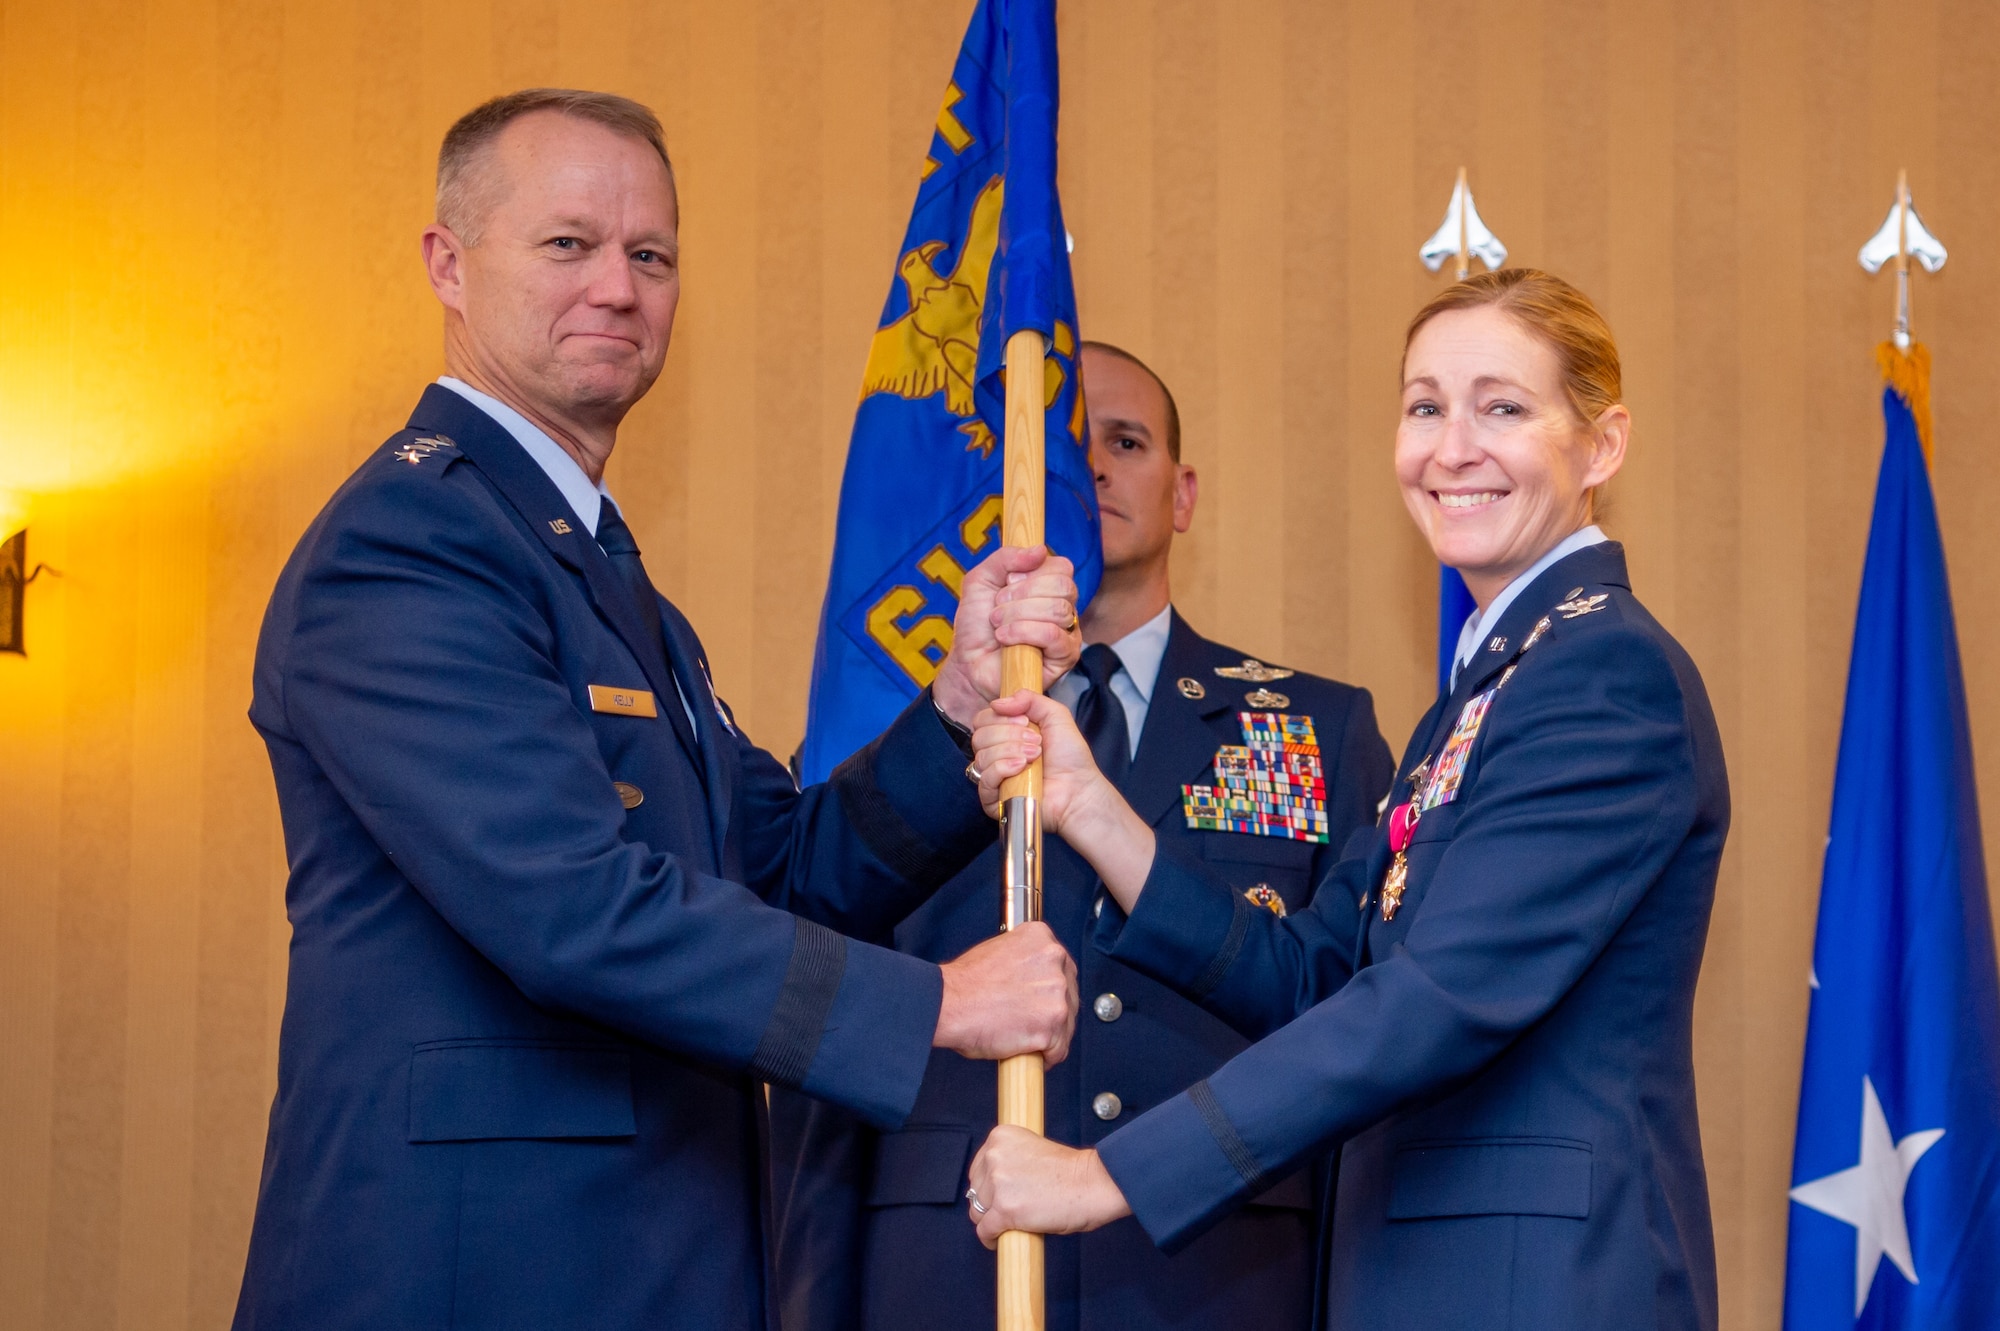 Col. Kim Campbell, pictured on the right, is currently the Director of the Center for Character and Leadership Development. Throughout her career, she has held multiple command positions including the 612th Theater Operations Group Commander & 474th Air Expeditionary Group Commander at Davis-Monthan Air Force Base, Arizona.